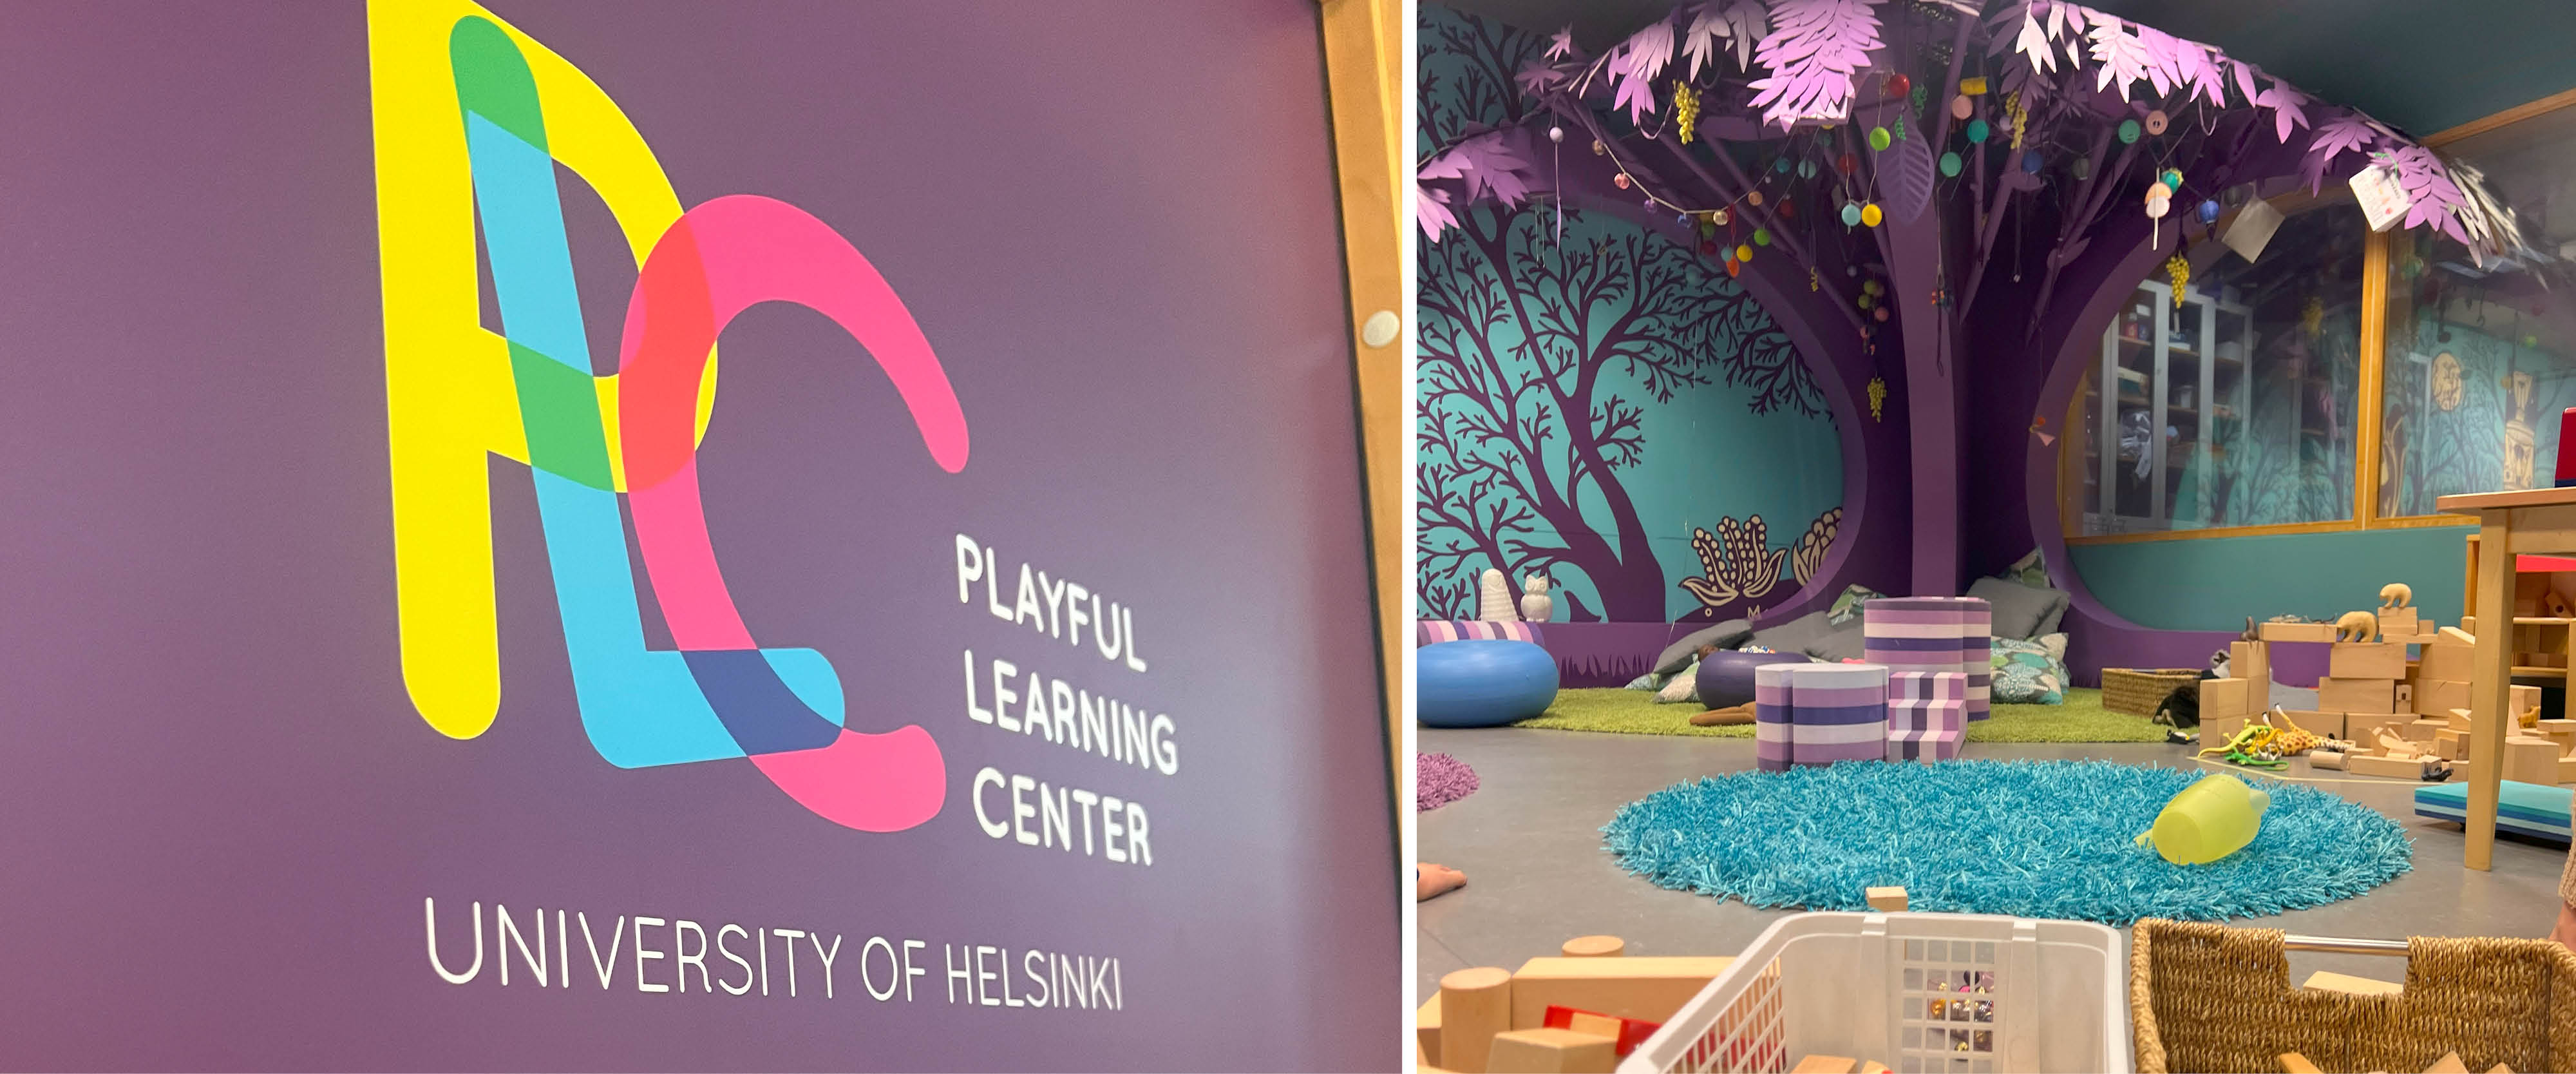 Two photos: on the left the University of Helsinki's Playful Learning Center logo and on the right the playful center's room, with a big purple tree with different colored ornaments hanging from its branches. Also there are kids' toys on the forefront.